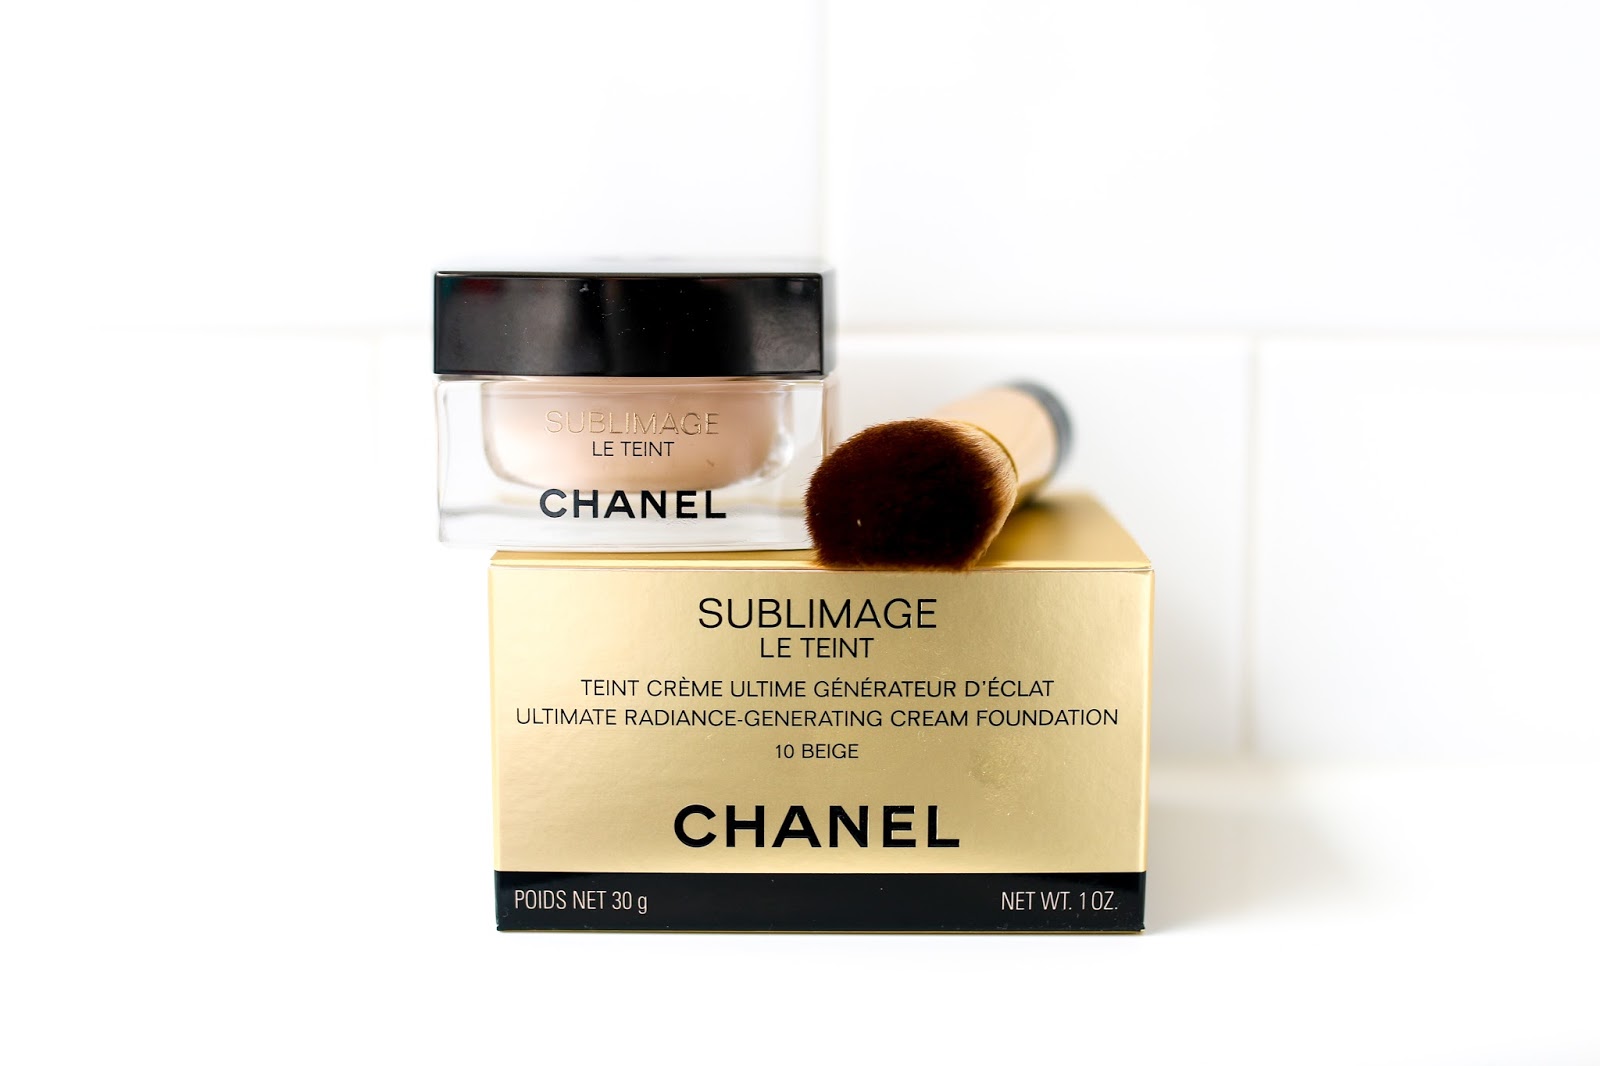 Review and Demo: Chanel Sublimage Le Teint Cream Foundation